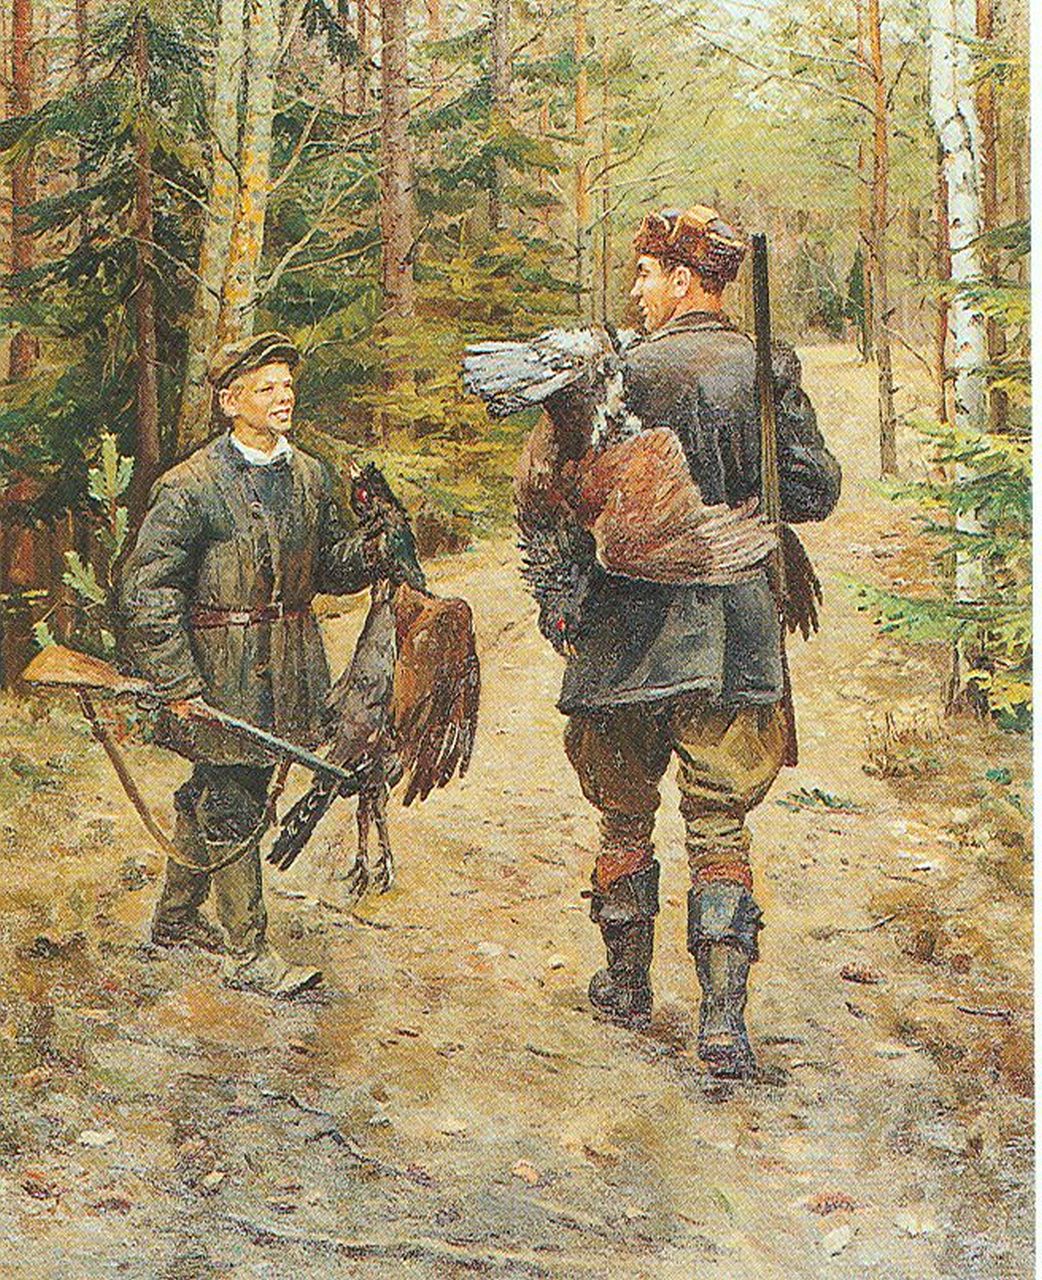 Sysoev N.A.  | Nikolay Aleksandrovitch Sysoev, Hunters in a forest, oil on canvas 124.0 x 100.0 cm, signed on the reverse and dated 1955